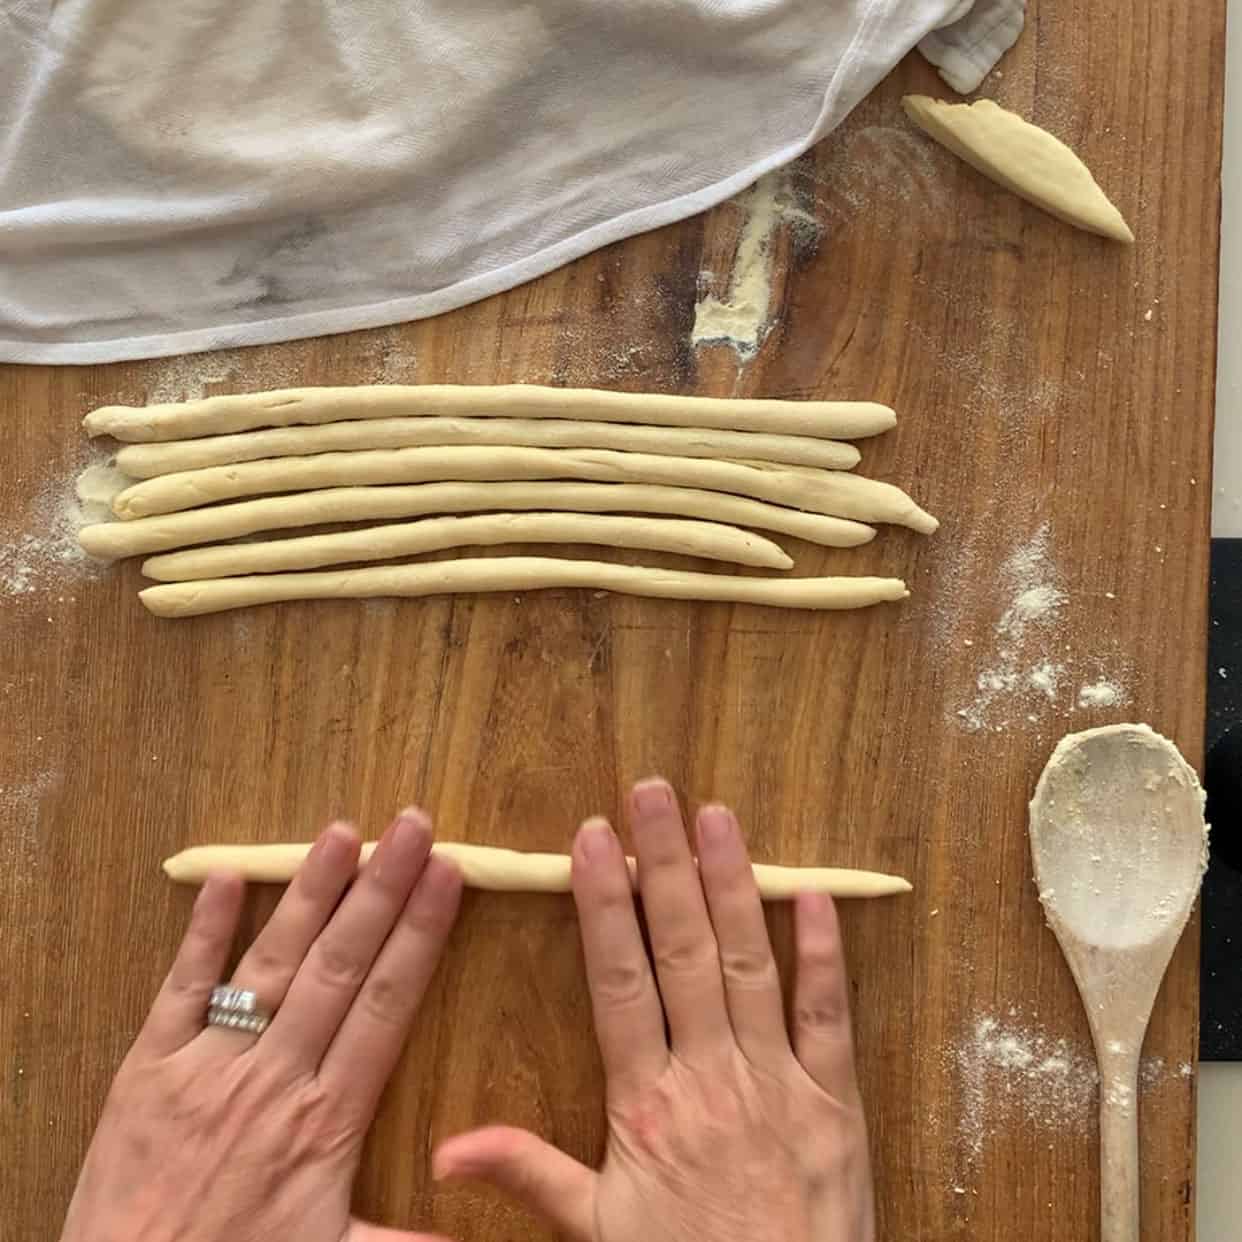 rolling dough into long ropes on wooden board